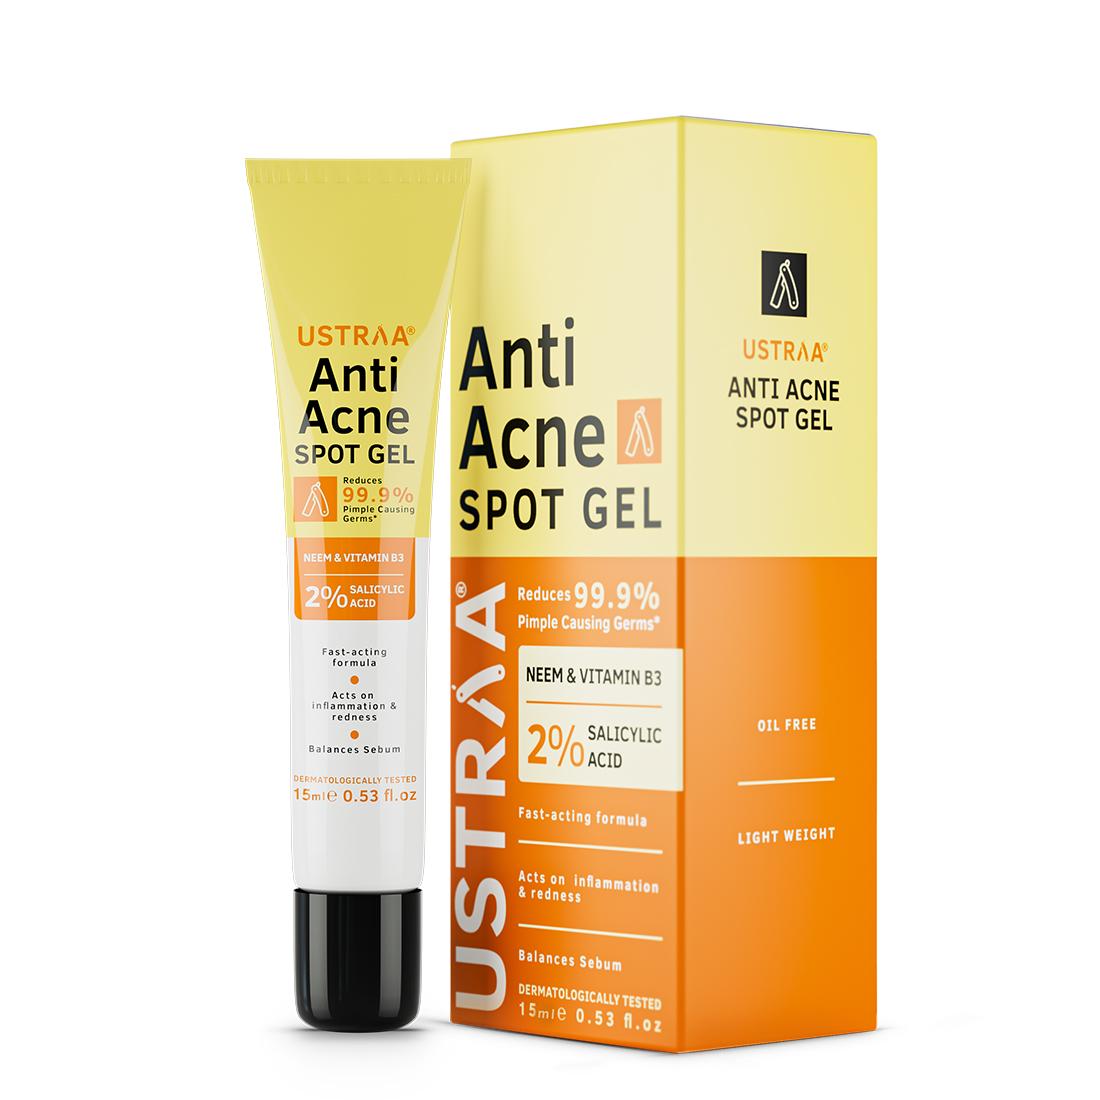 Ustraa Anti-Acne Spot Gel with Neem & Vitamin B3 - 15ml - Reduces 99.9% Pimple - causing germs